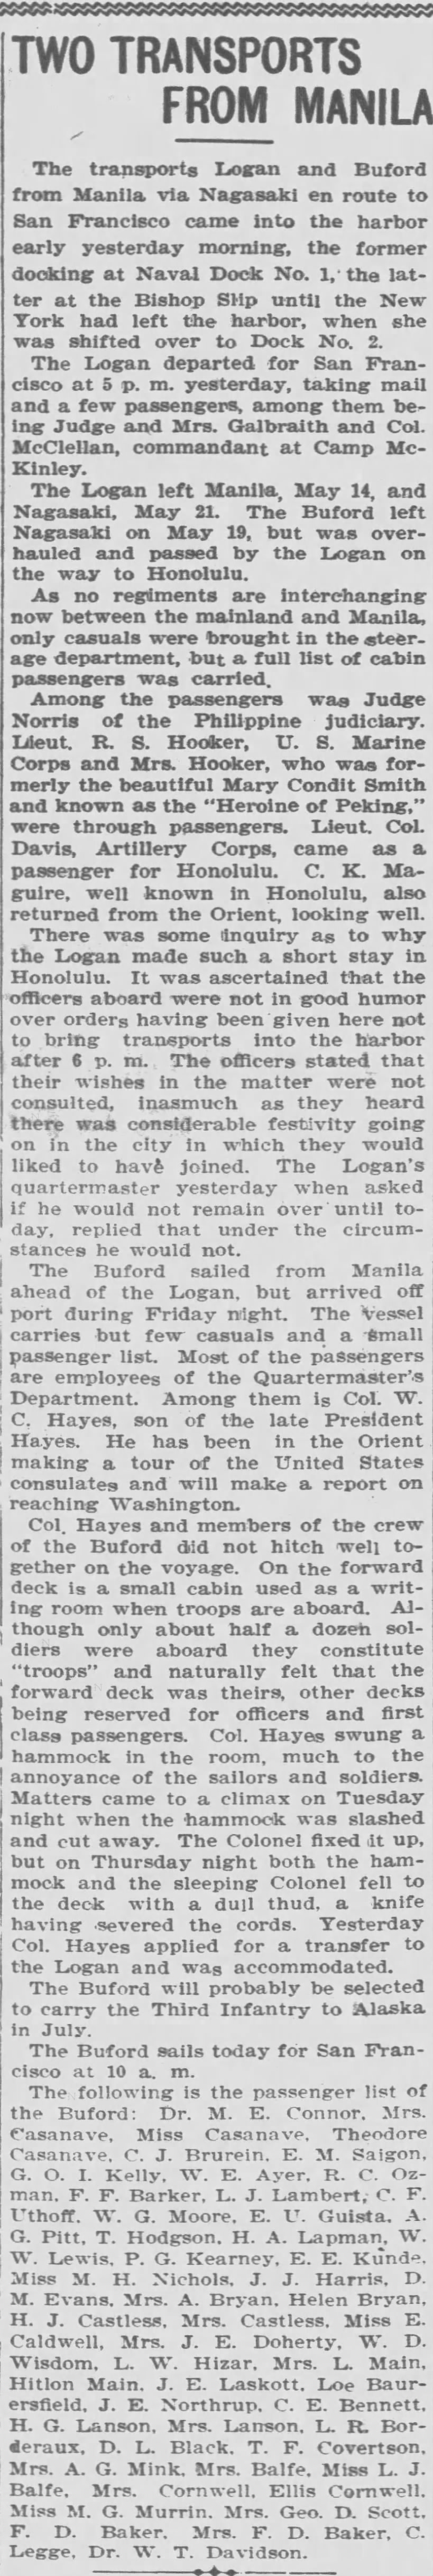 The Buford sails from Manila.
Casanave's aboard- 5 June 1904